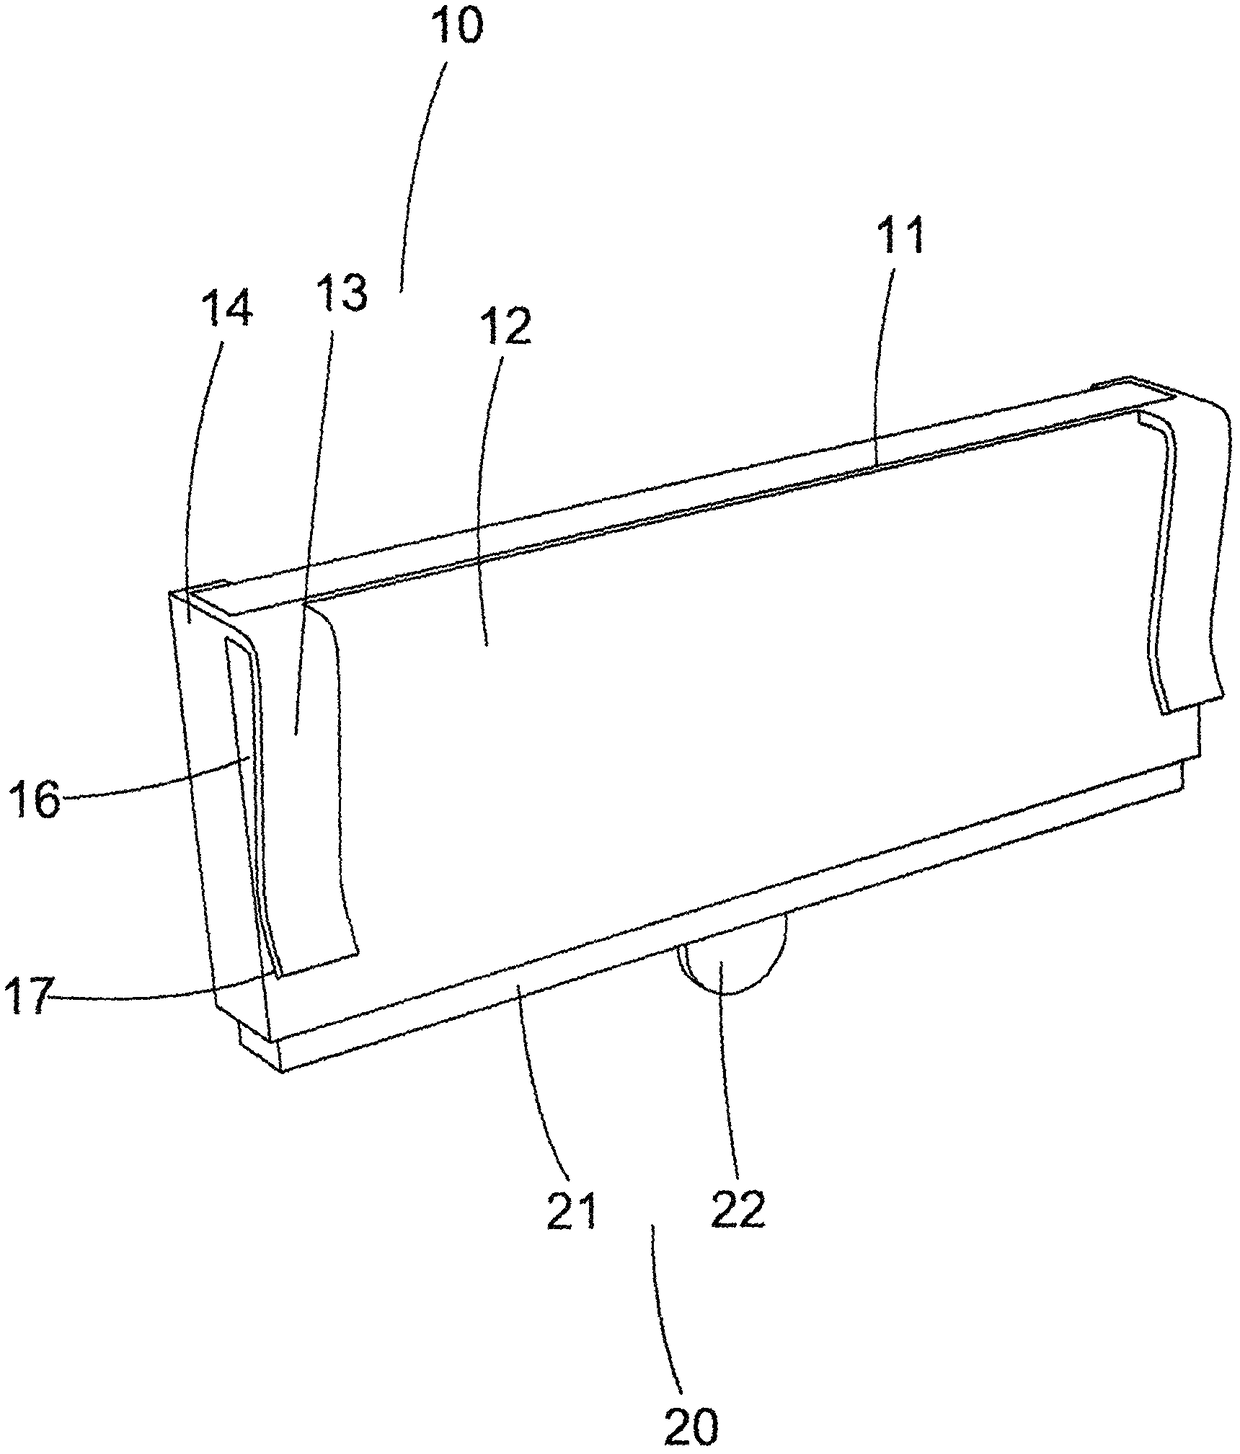 Navigation device suitable for being mounted on rearview mirror in vehicle